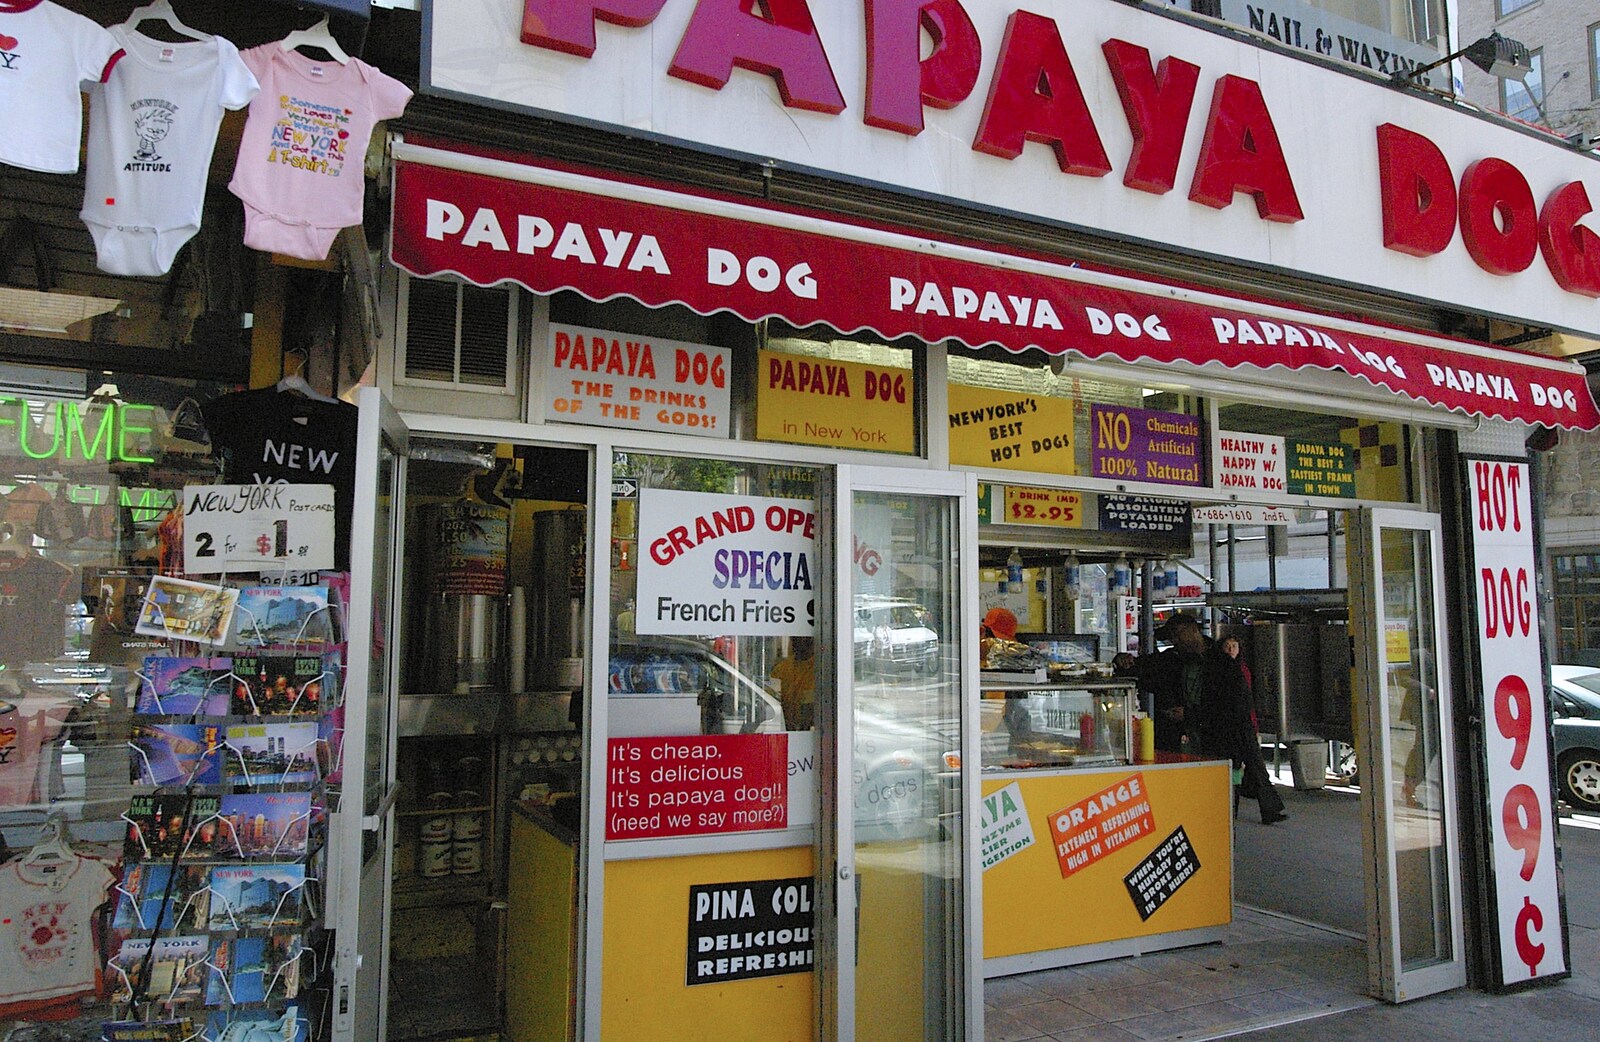 A 'Papaya Dog' shop on the corner of 5th and 33rd from Times Square, the Empire State and Ground Zero, New York, US - 1st May 2006